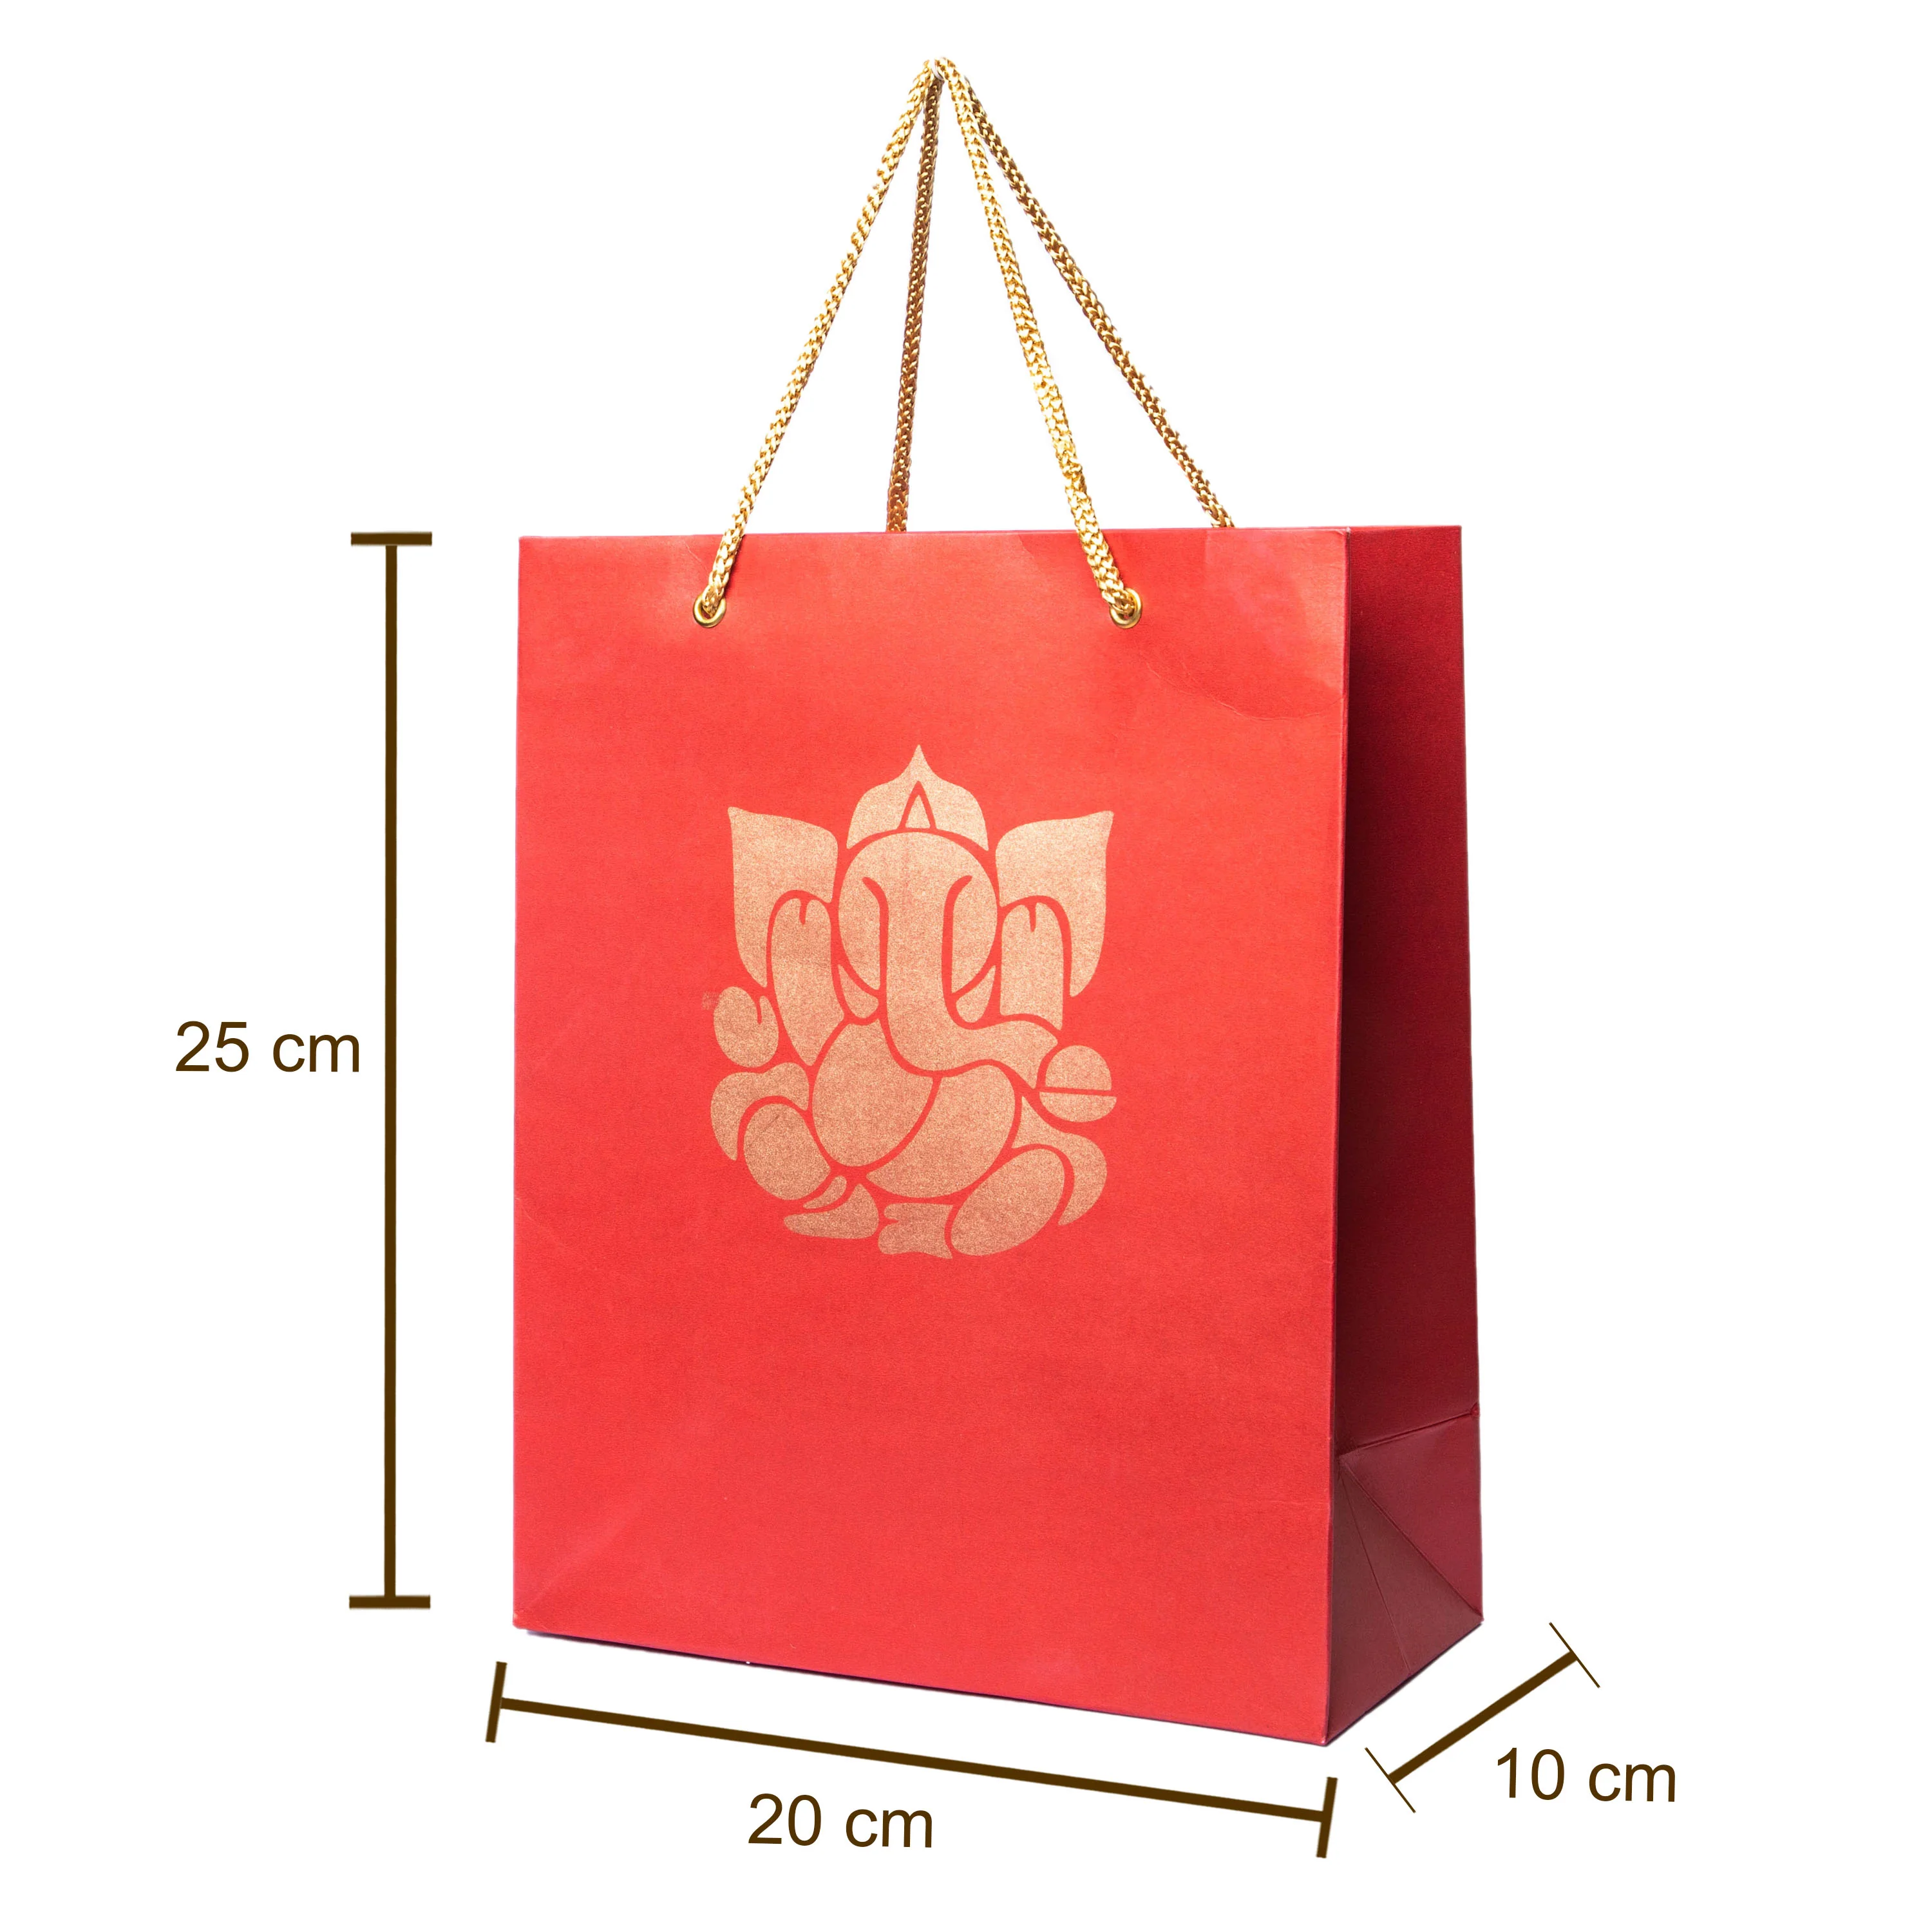 Gold foil Printed Ganesh on either side of the bag